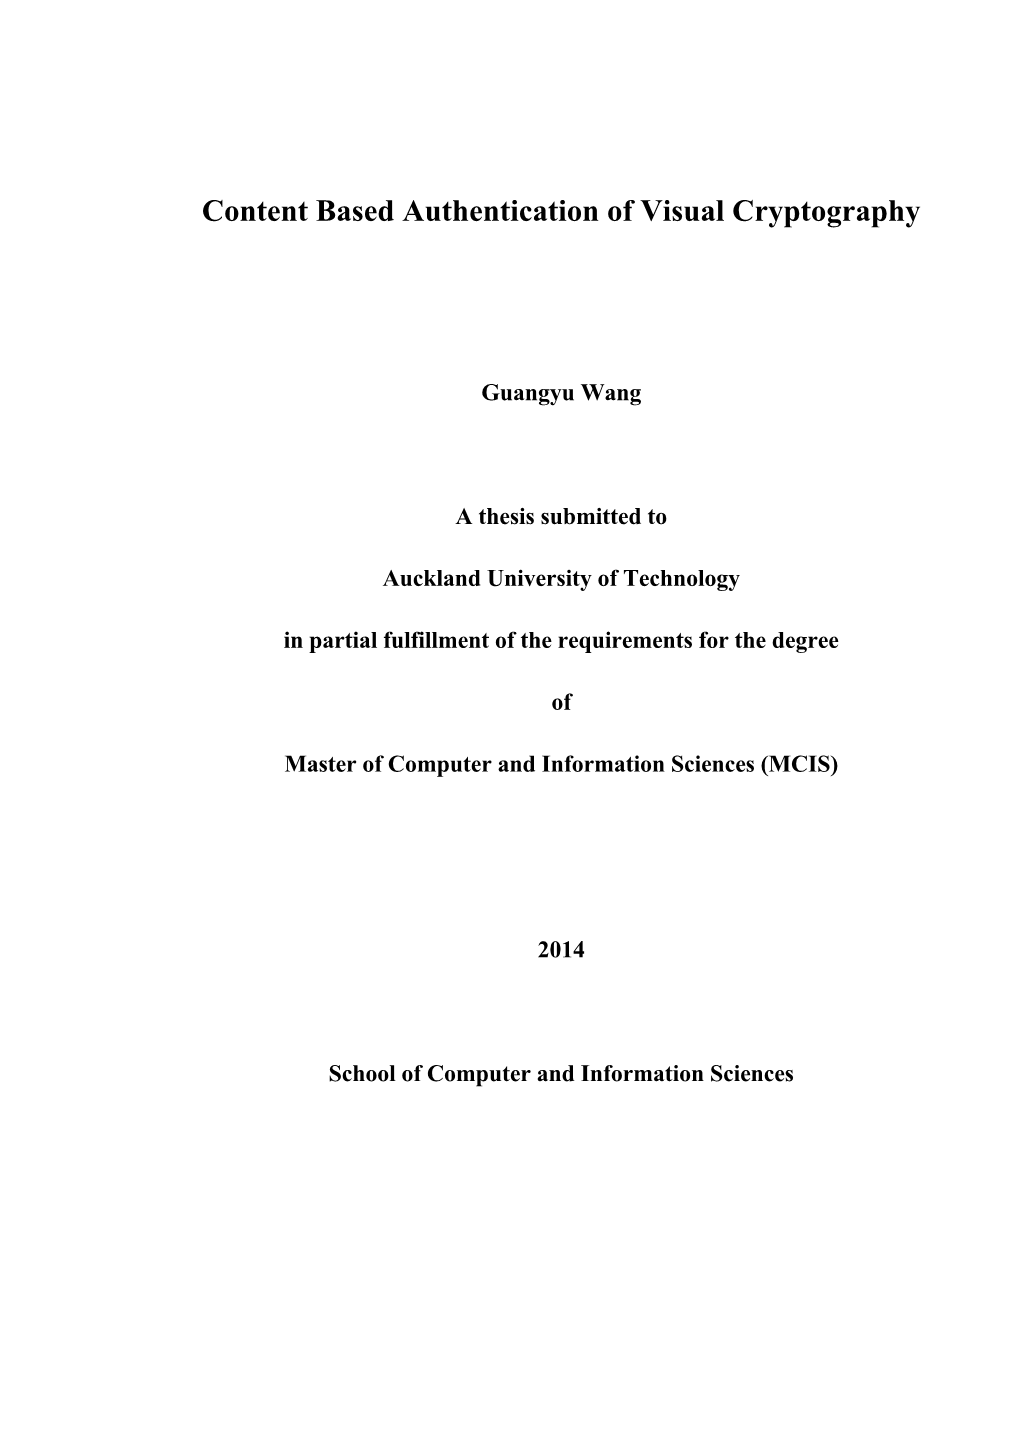 Content Based Authentication of Visual Cryptography